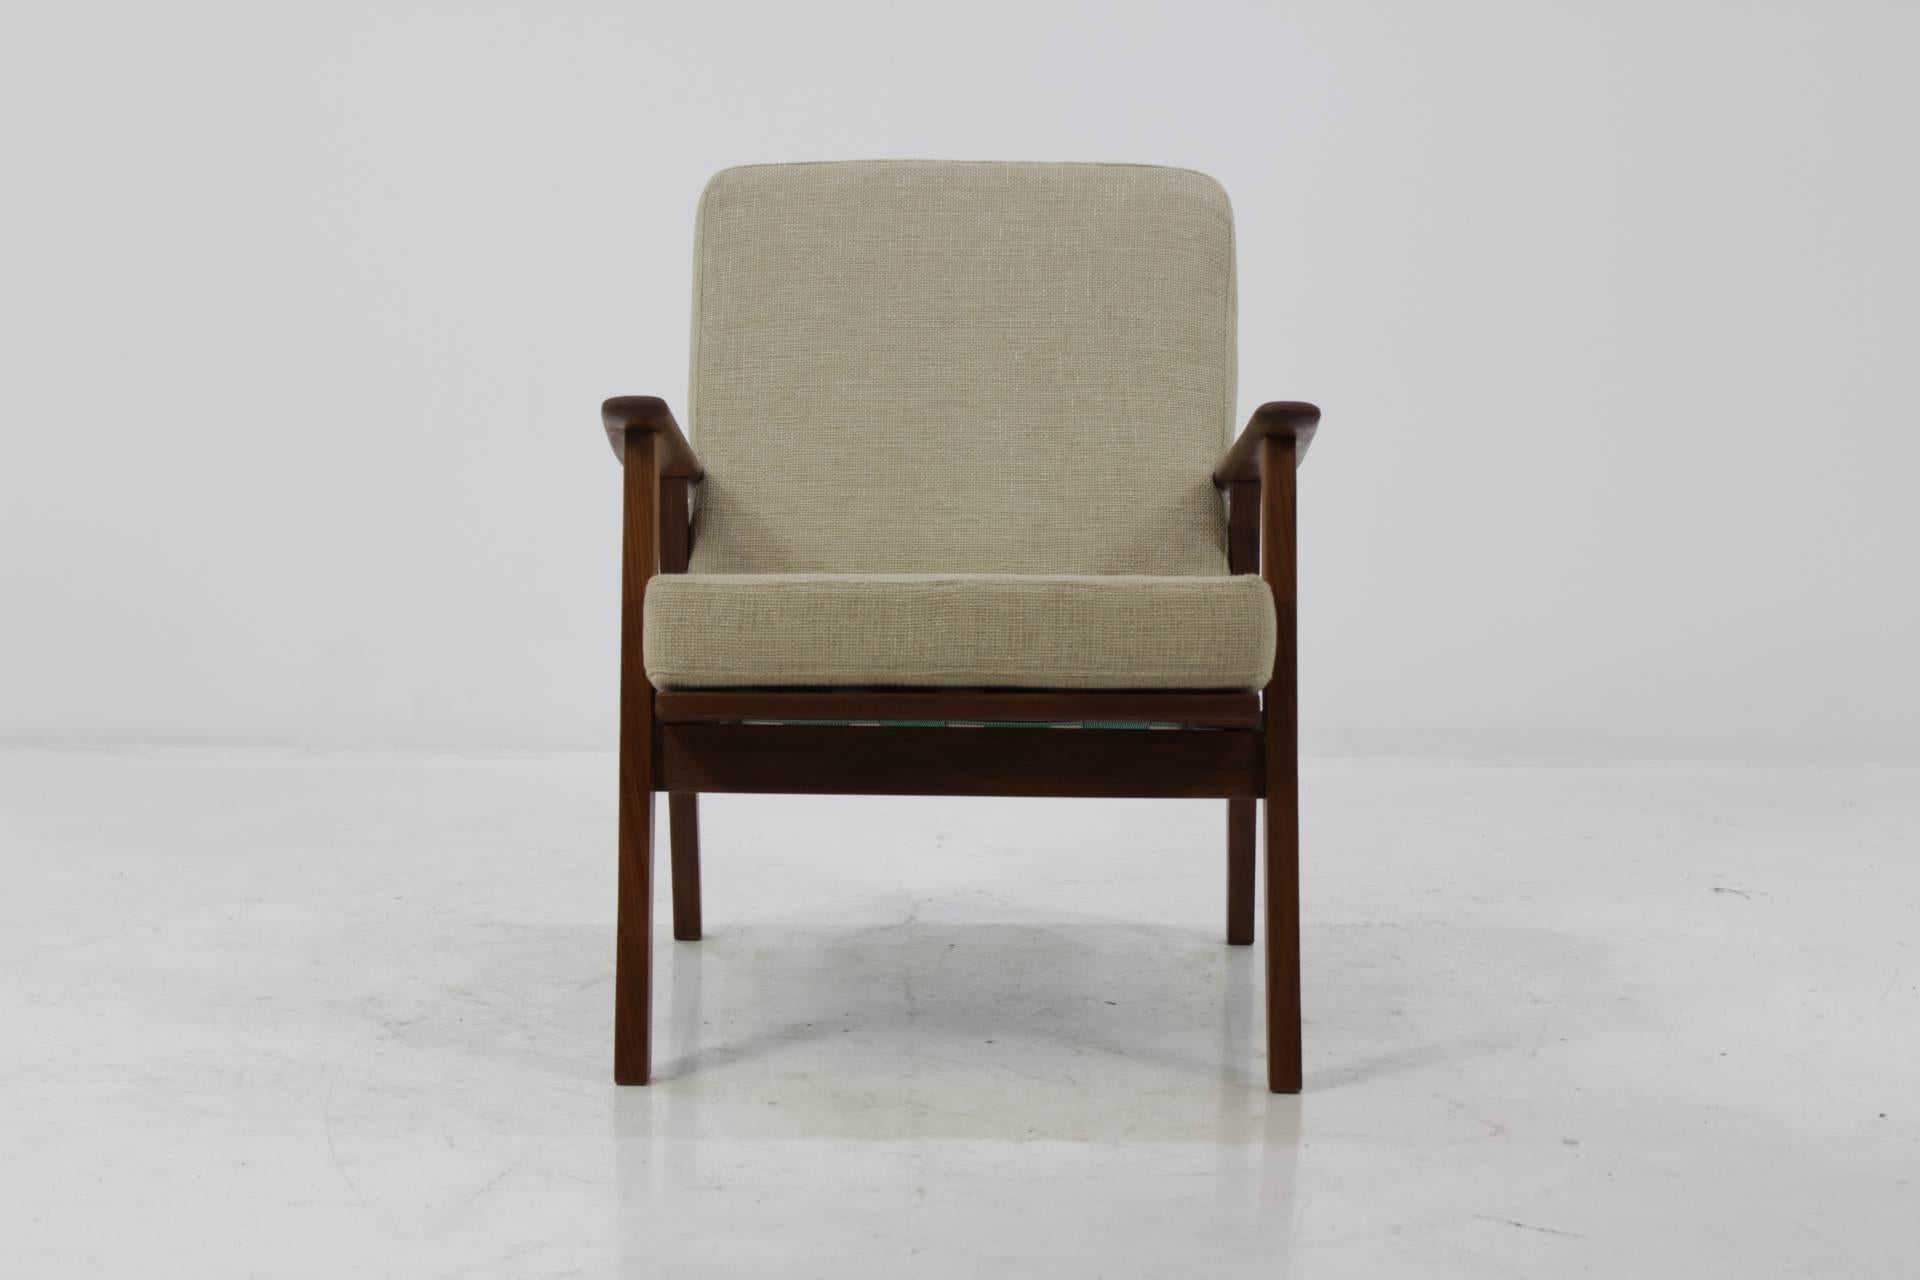 The chair features wooden teak frame and new fabric upholstery. Very good condition.